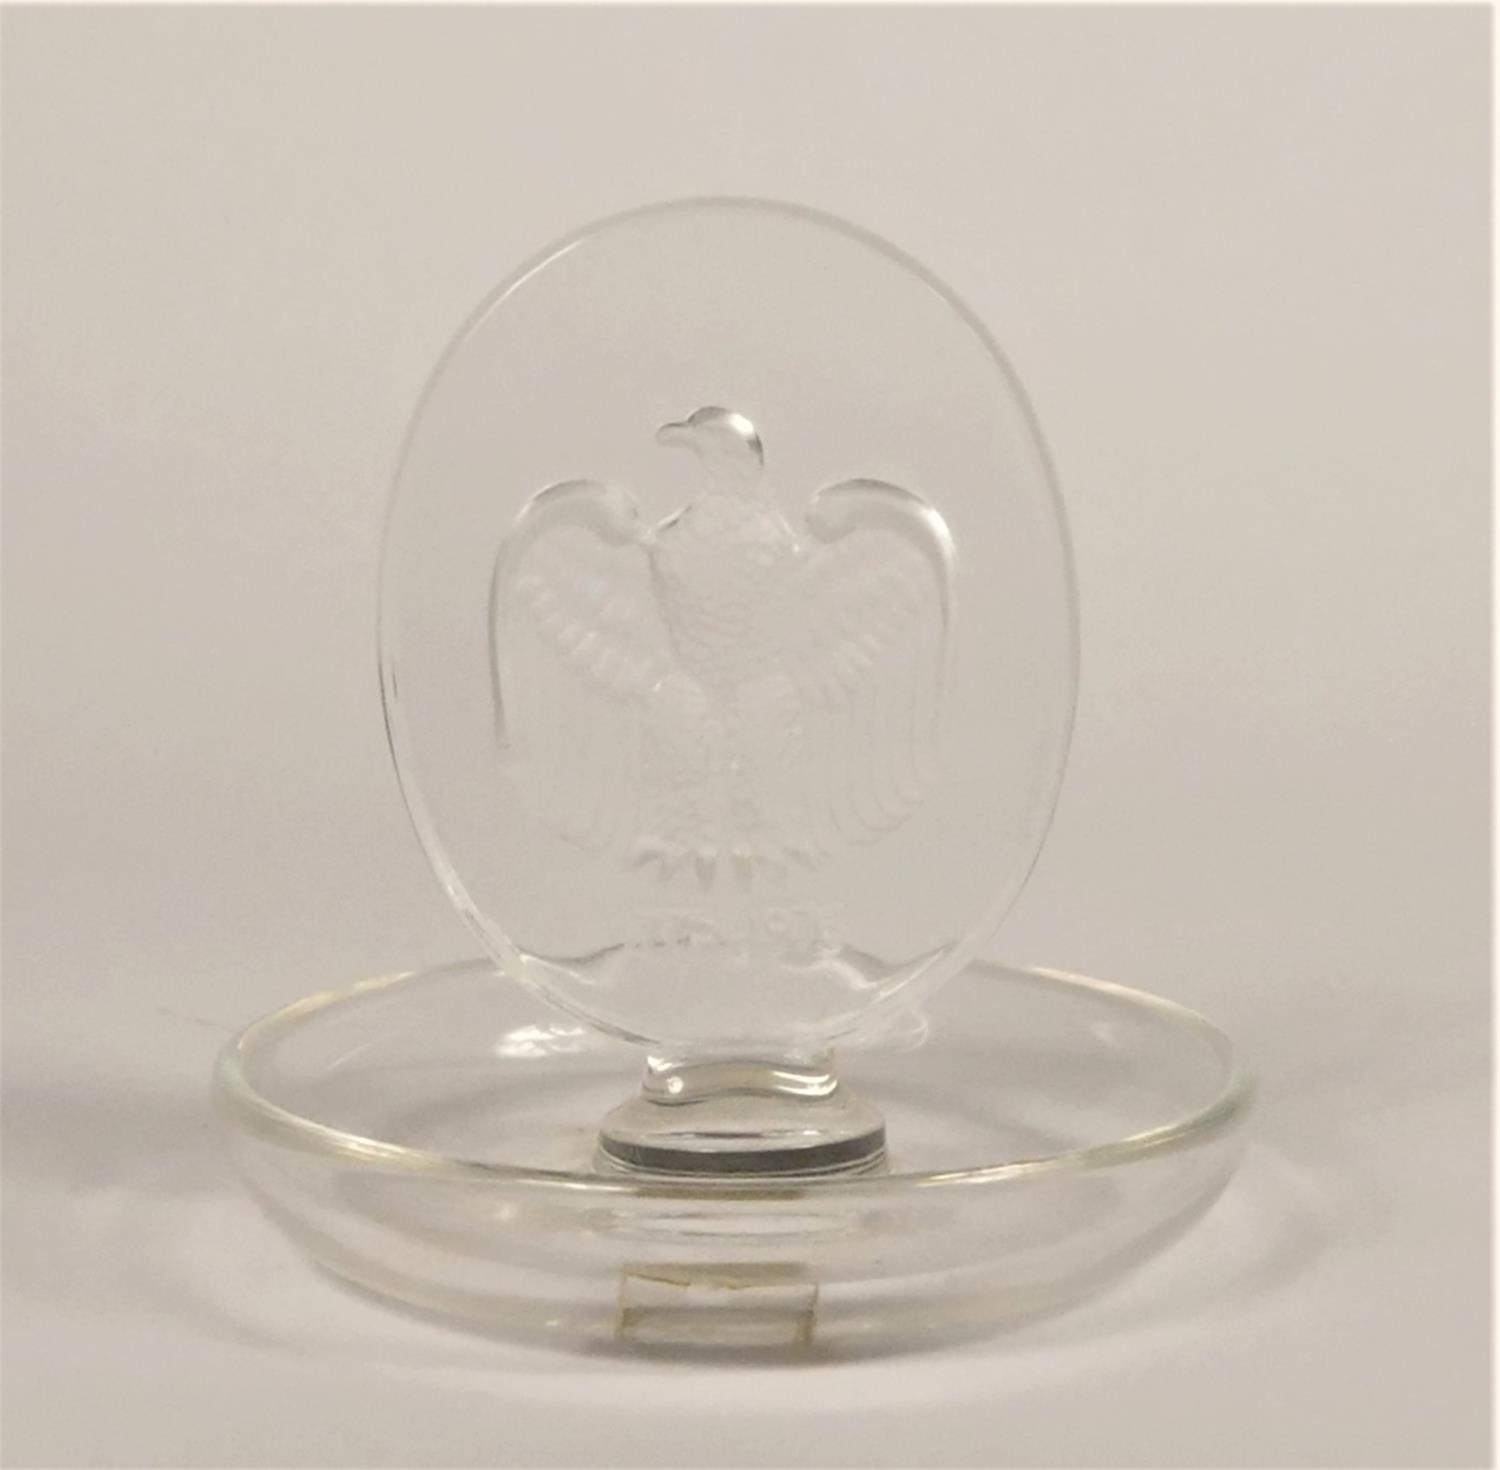 A Lalique bicentennial pin dish, decorated with American eagle 1776-1976, ht 9.5cm, signed, original